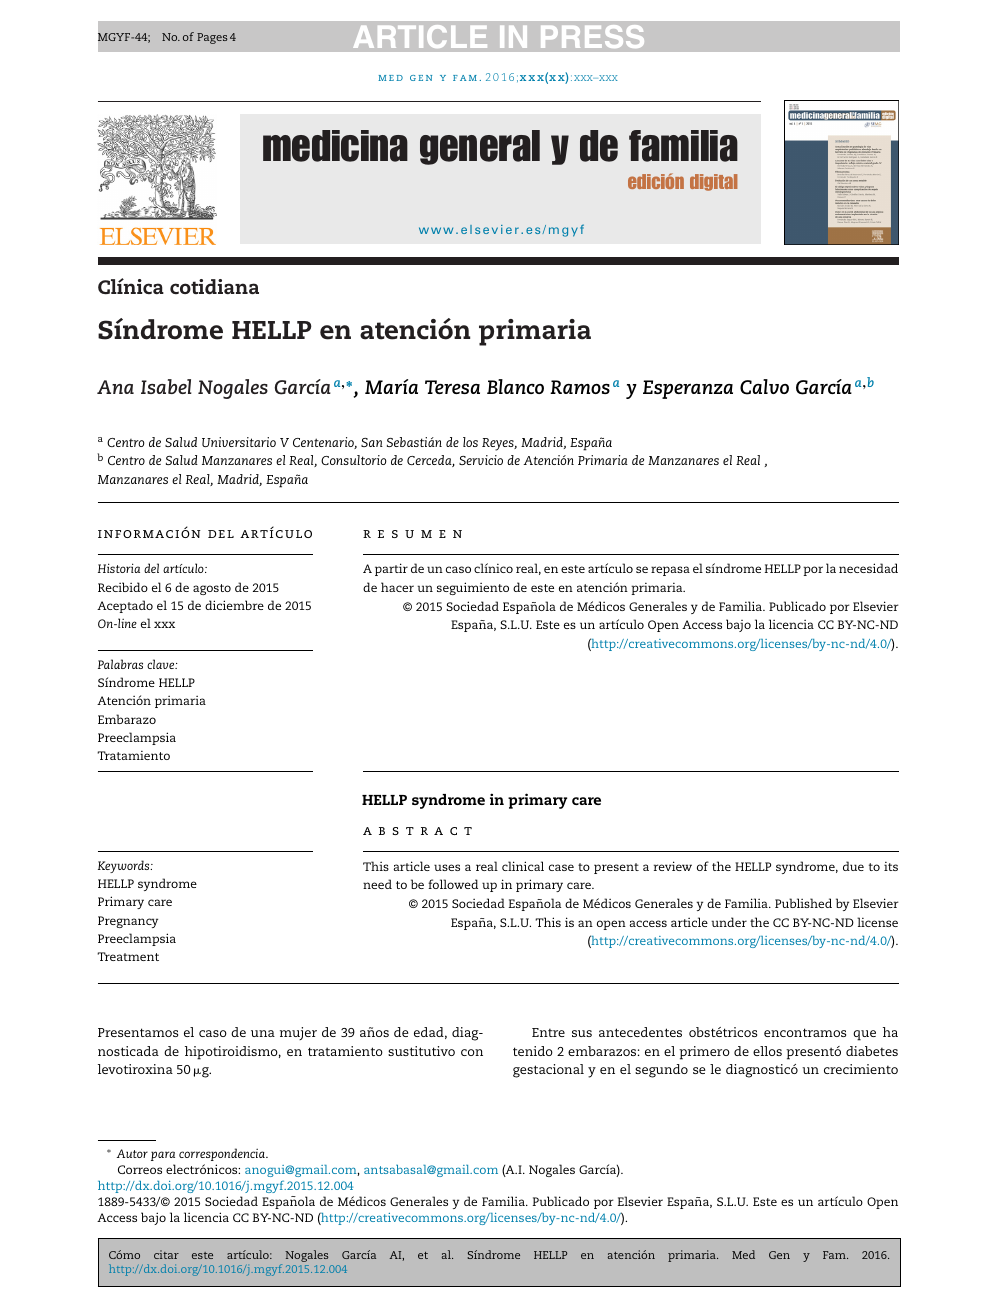 Sindrome Hellp En Atencion Primaria Topic Of Research Paper In Health Sciences Download Scholarly Article Pdf And Read For Free On Cyberleninka Open Science Hub